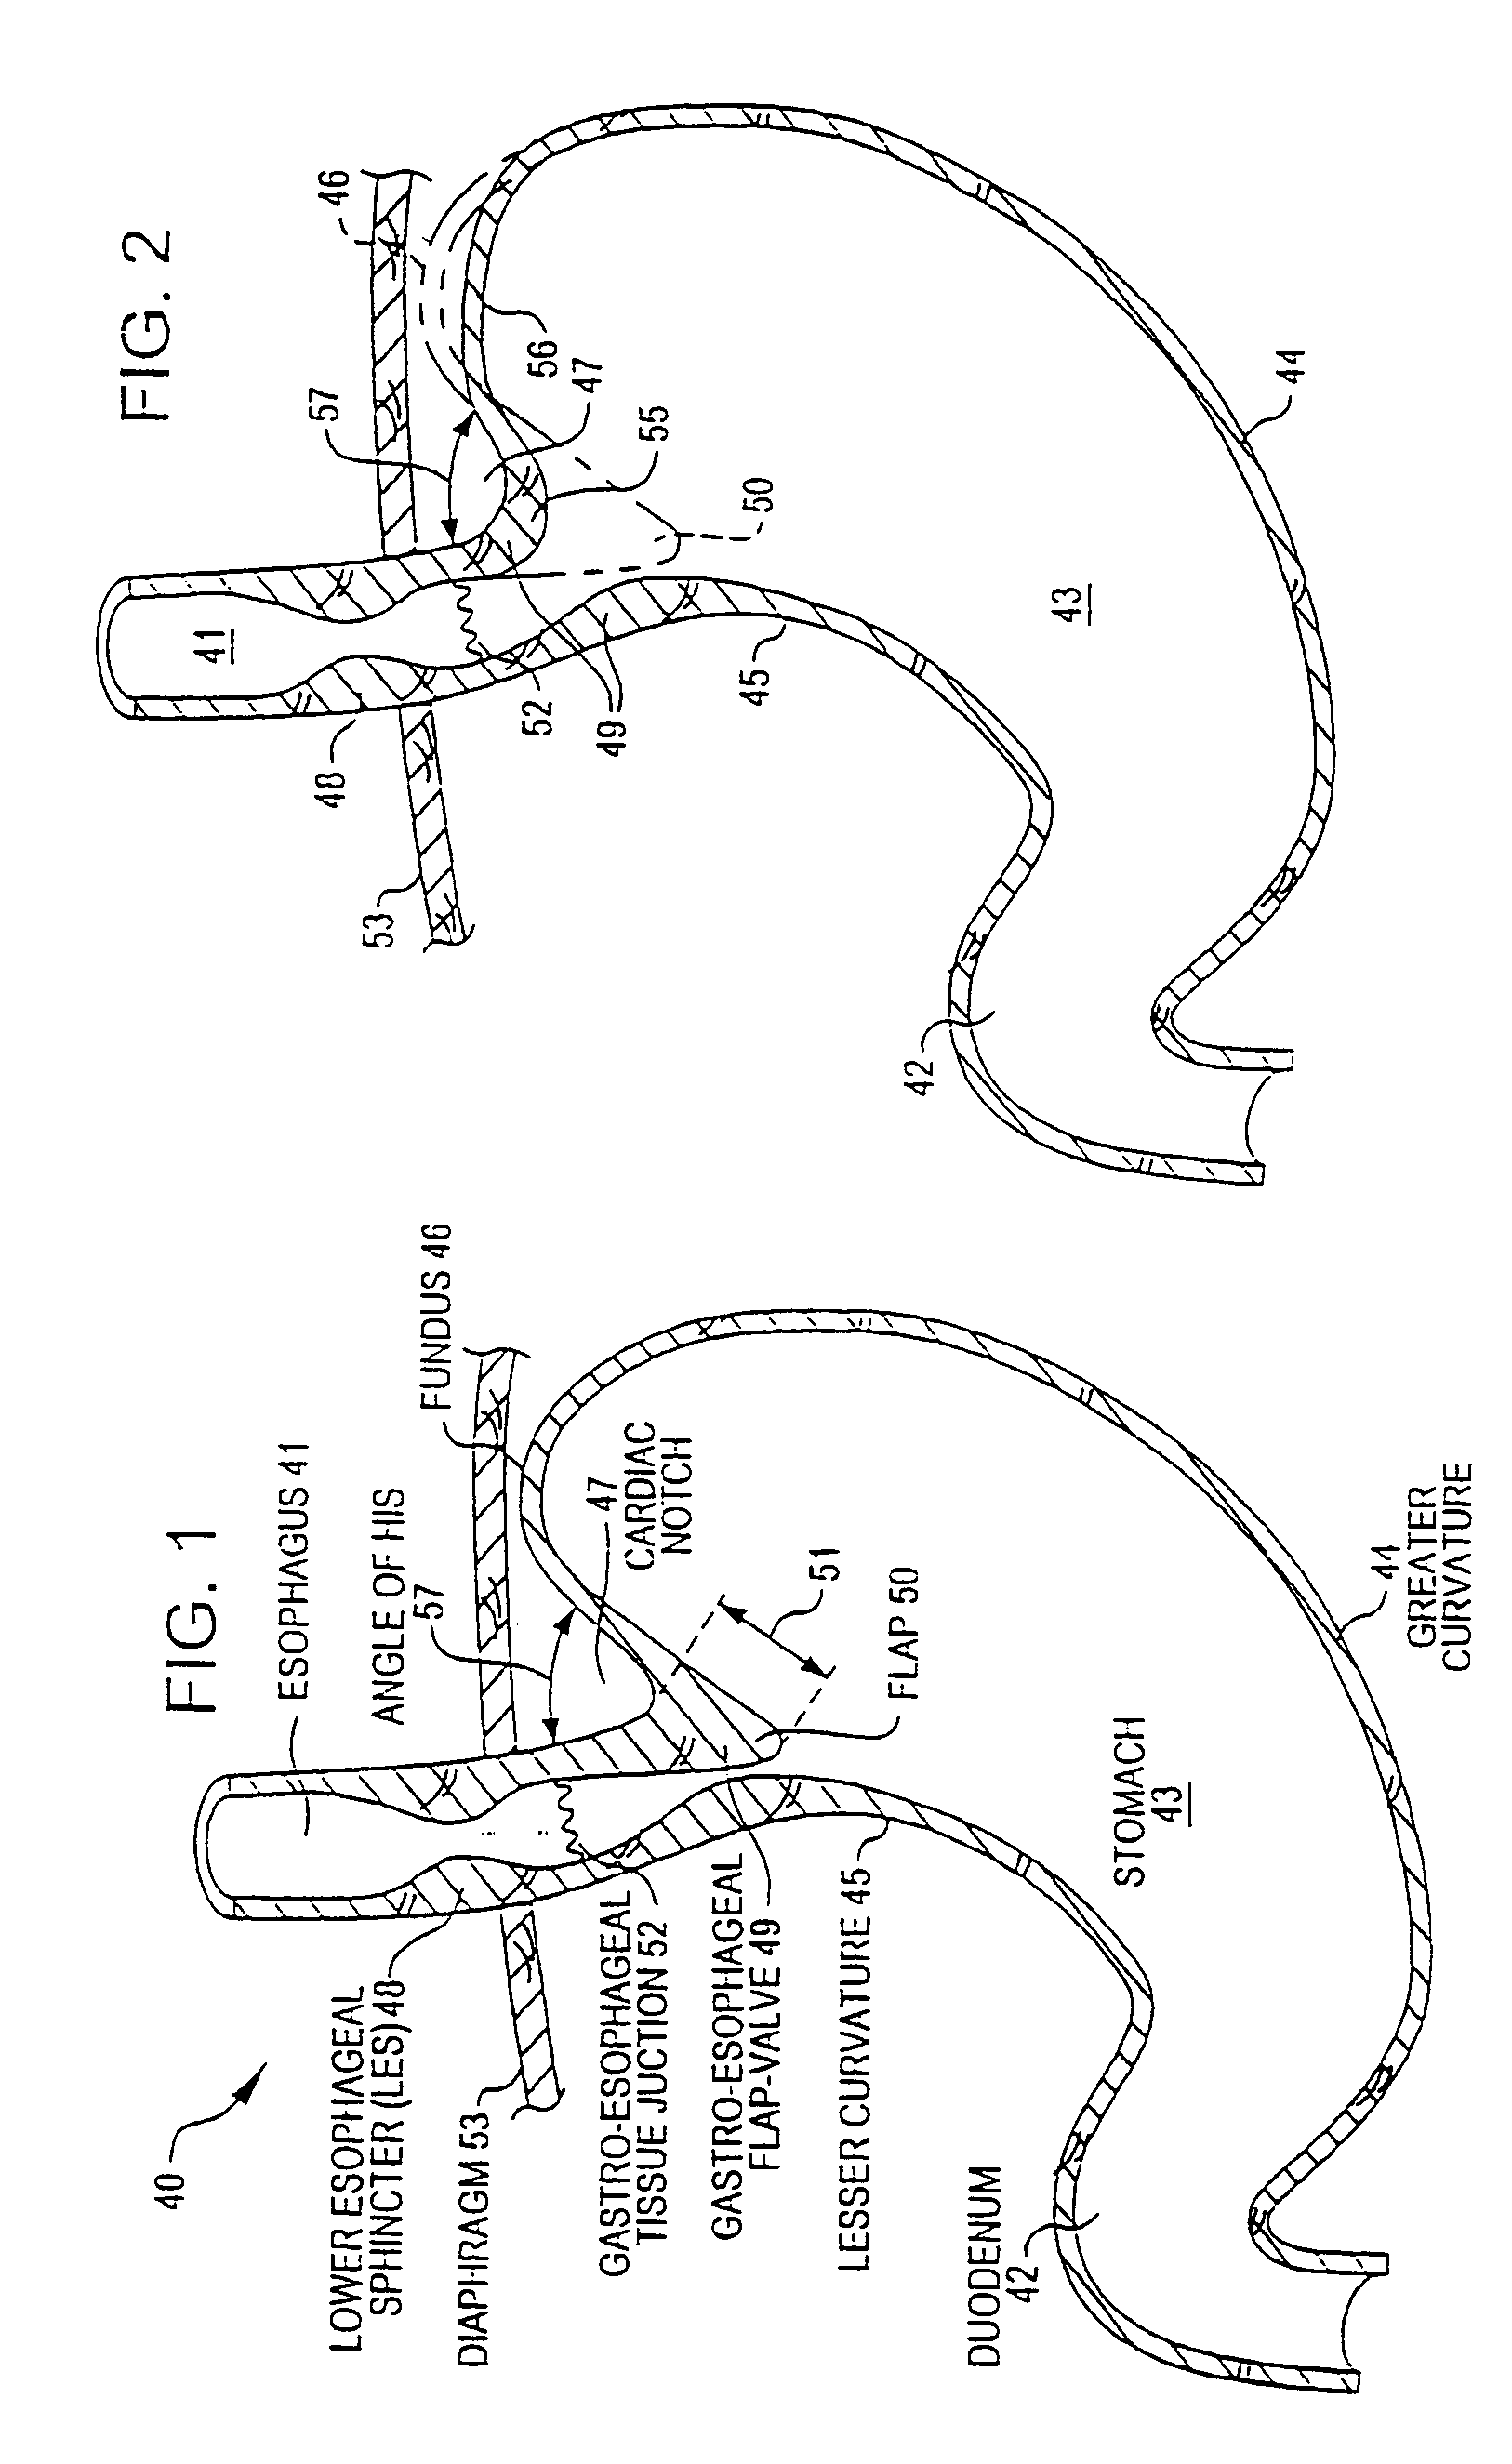 Tissue fixation devices and assemblies for deploying the same